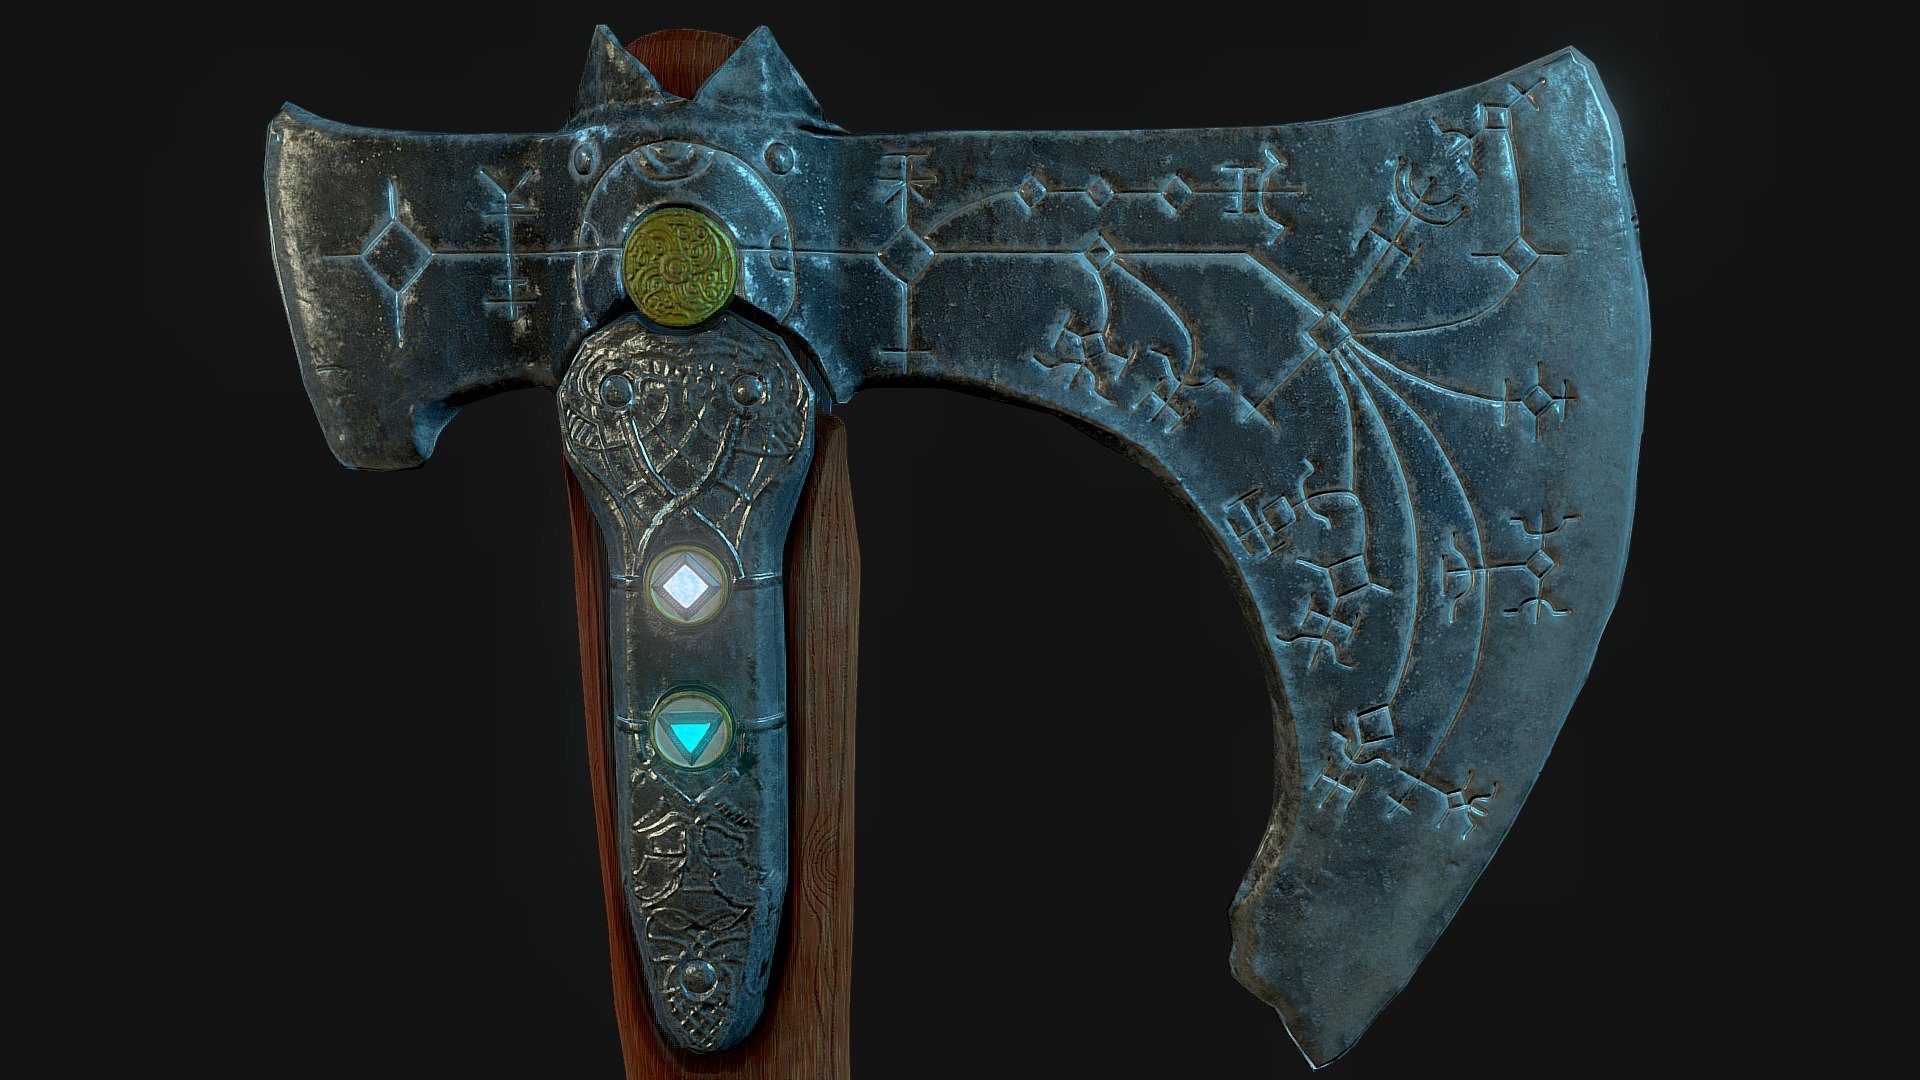 leviathan-axe-god-of-war-download-free-3d-model-by-deleon-dele0n